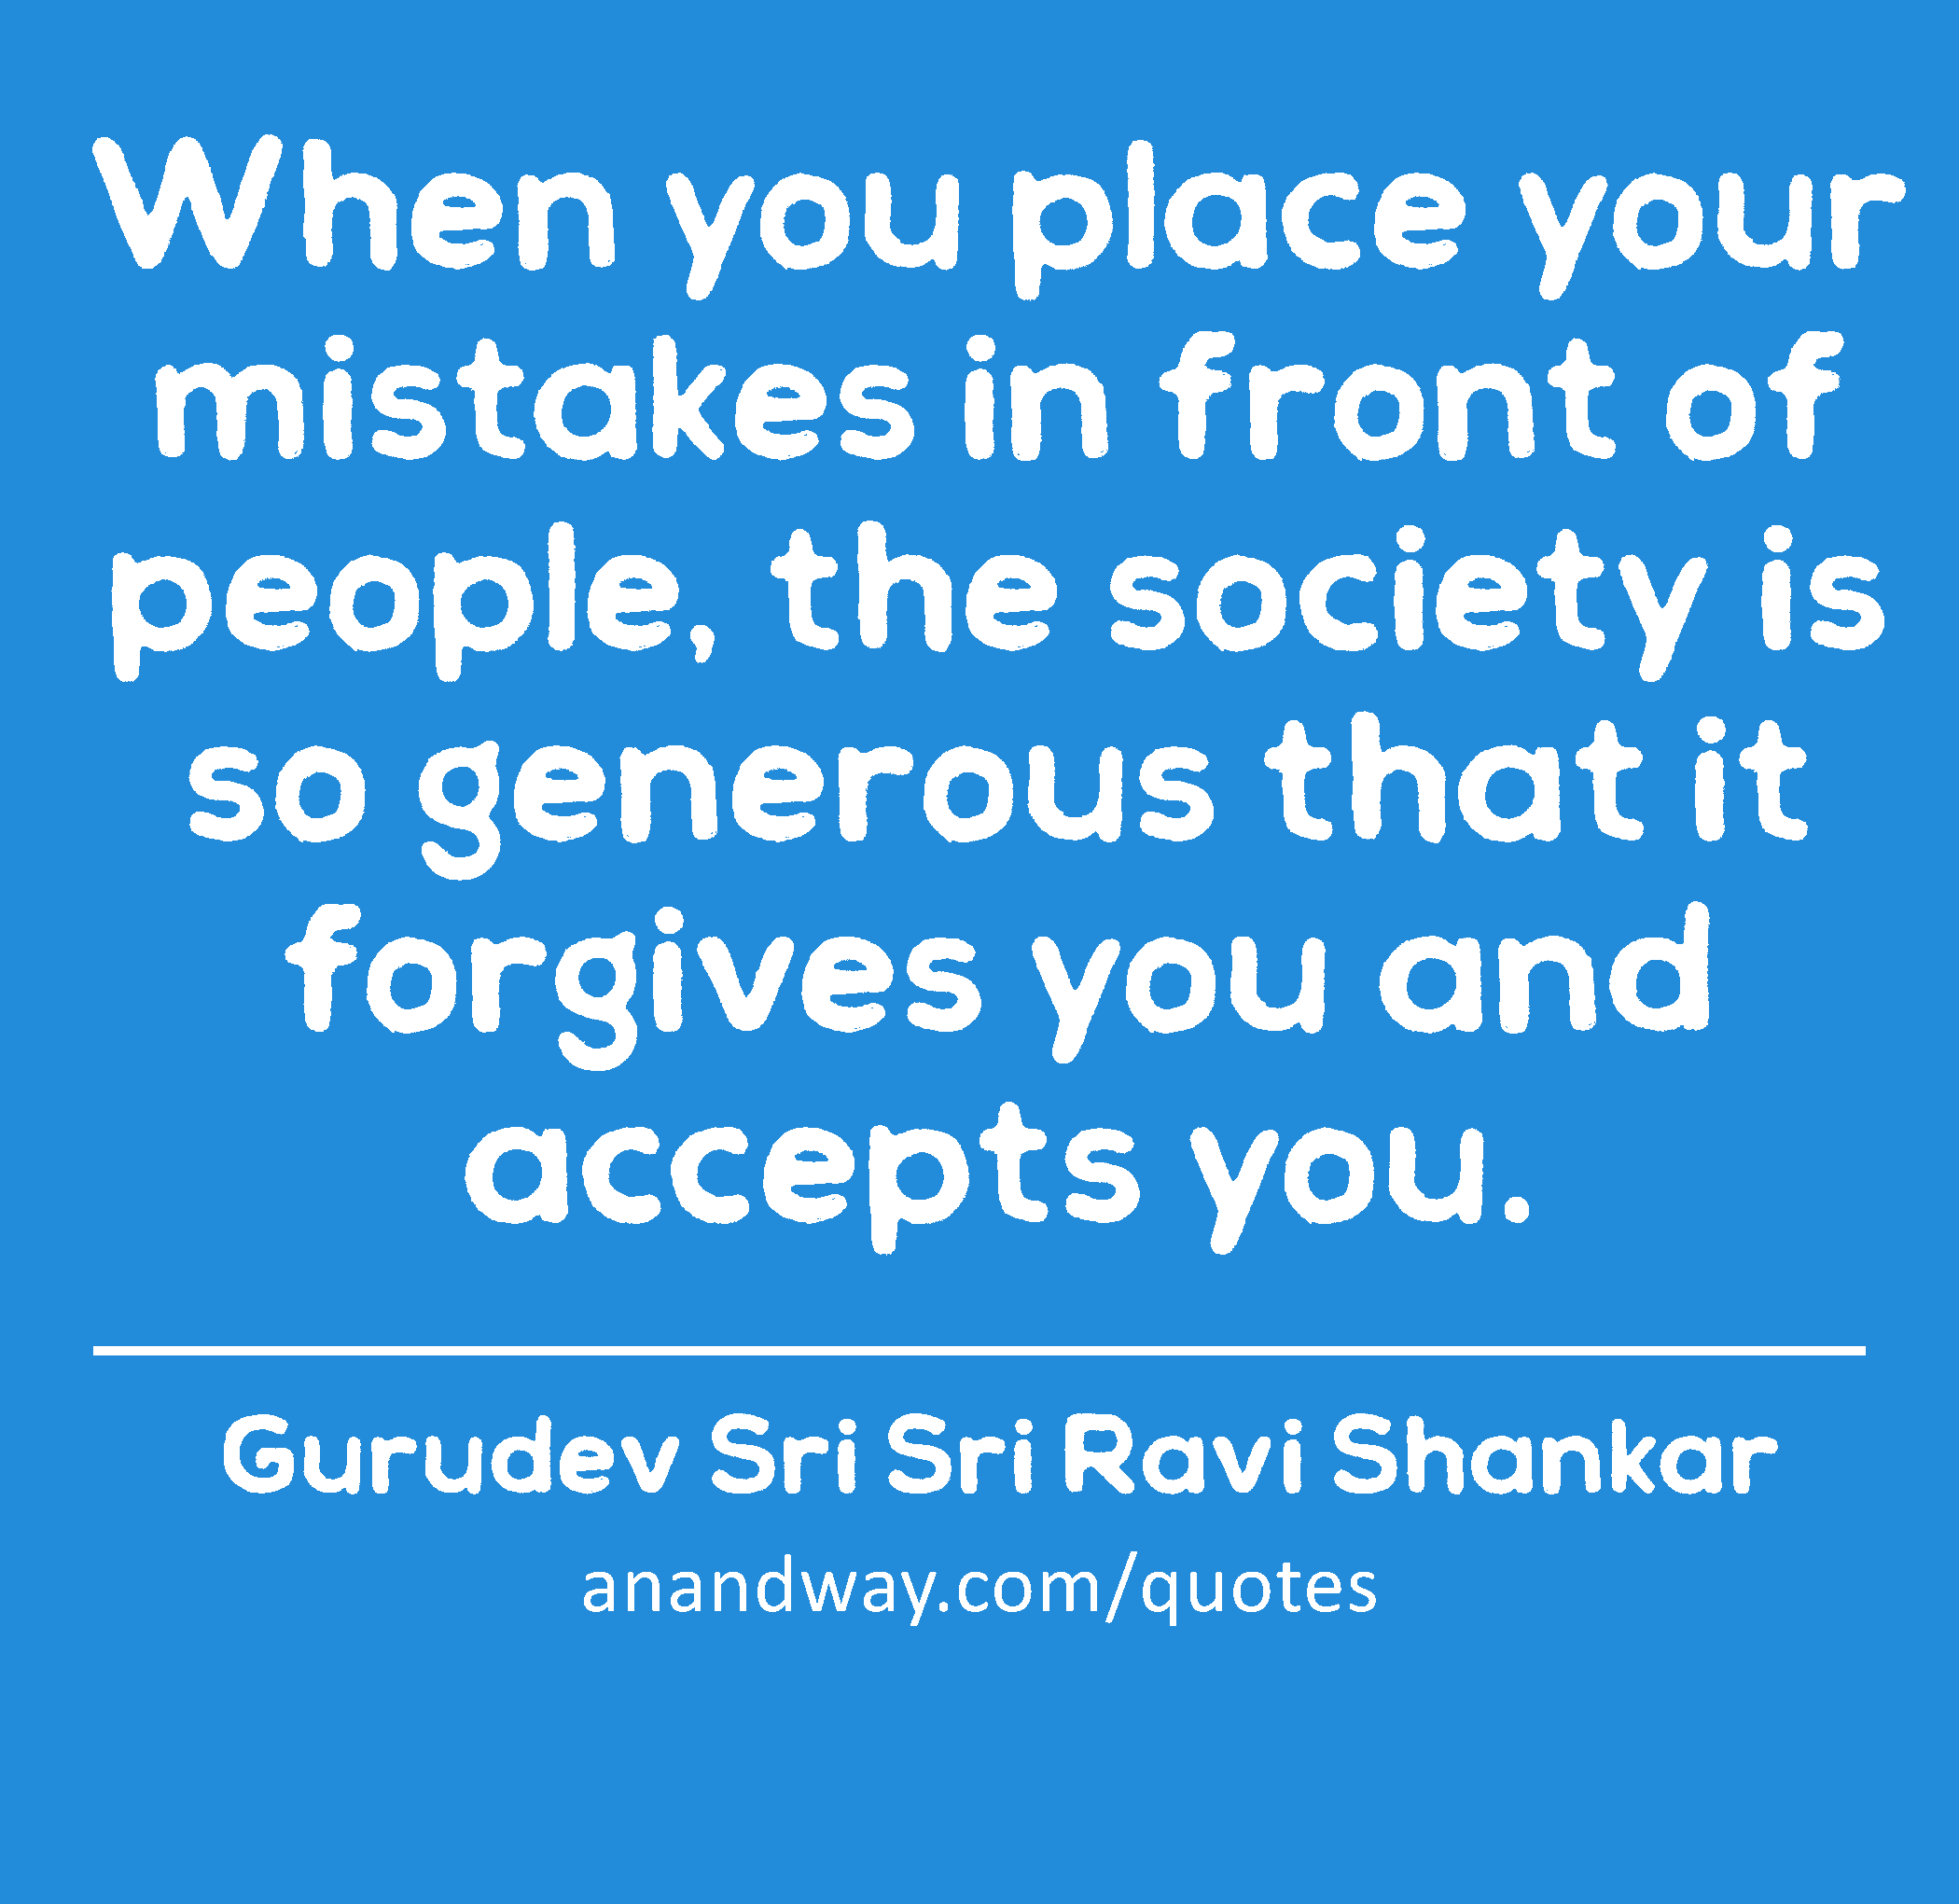 When you place your mistakes in front of people, the society is so generous that it forgives you
 -Gurudev Sri Sri Ravi Shankar